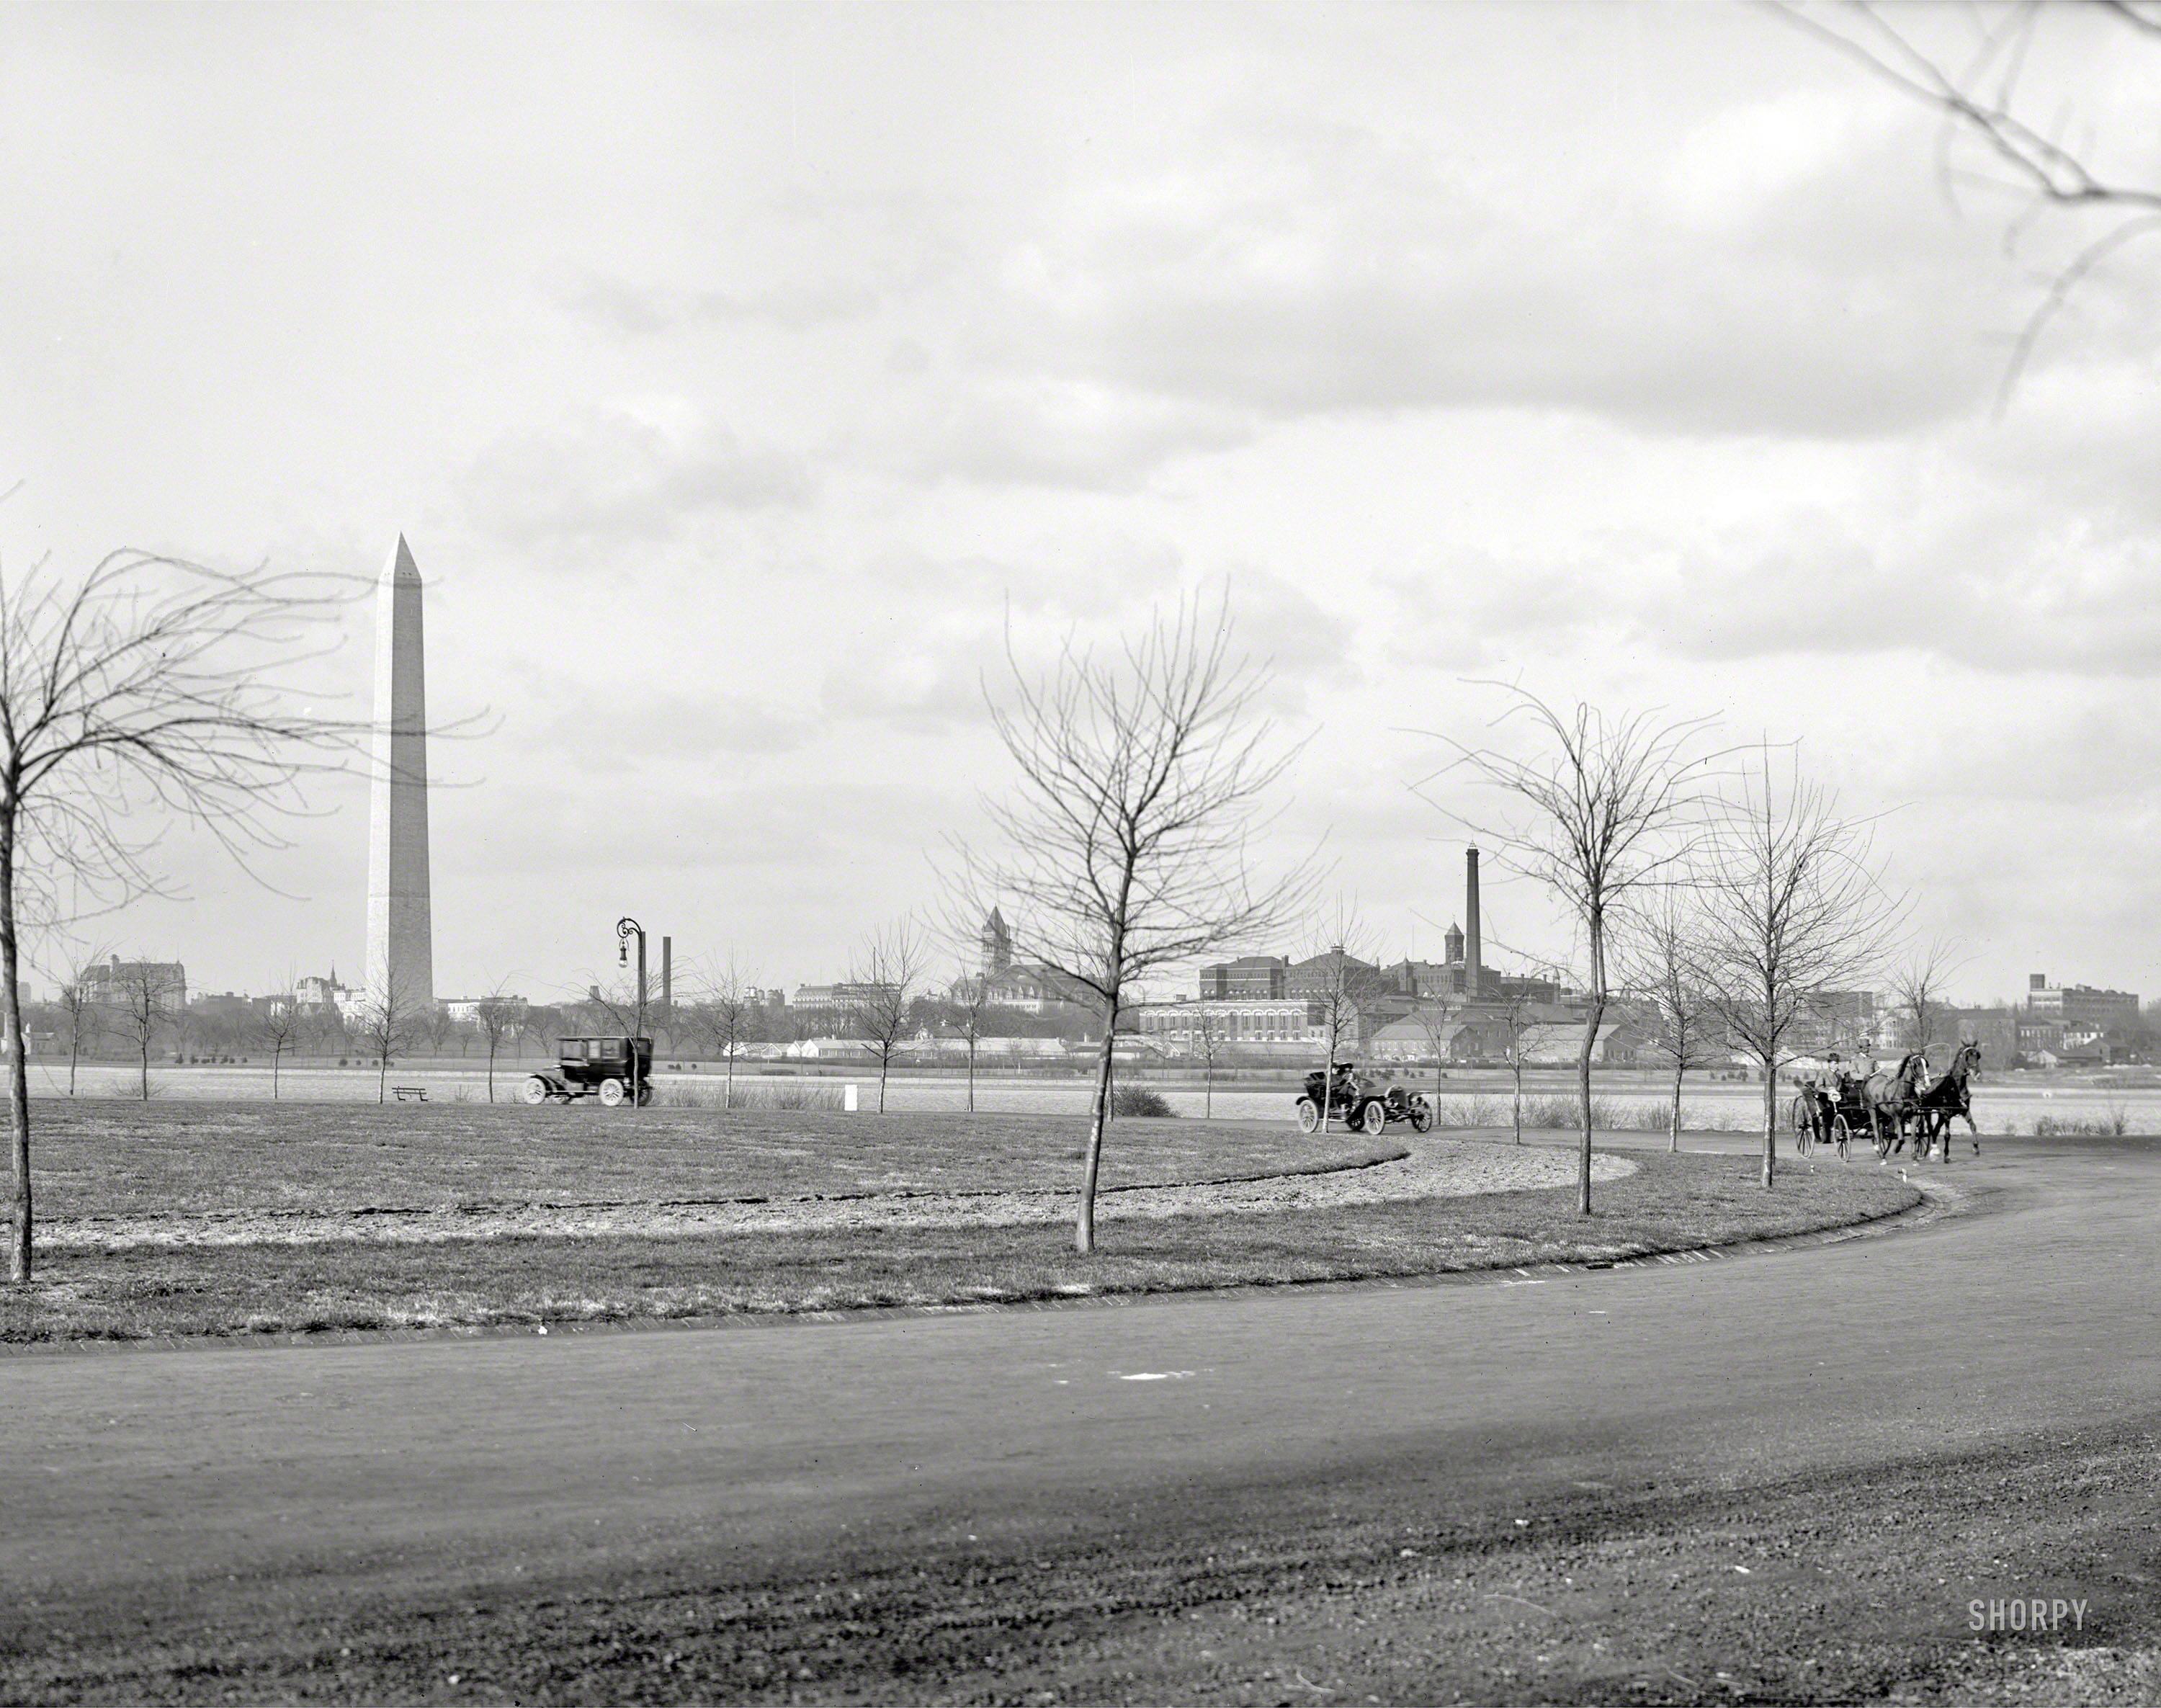 Circa 1908. "The Boulevard, Potomac Park, Washington, D.C." Various national landmarks in a strikingly uncrowded capital. 8x10 glass negative. View full size.